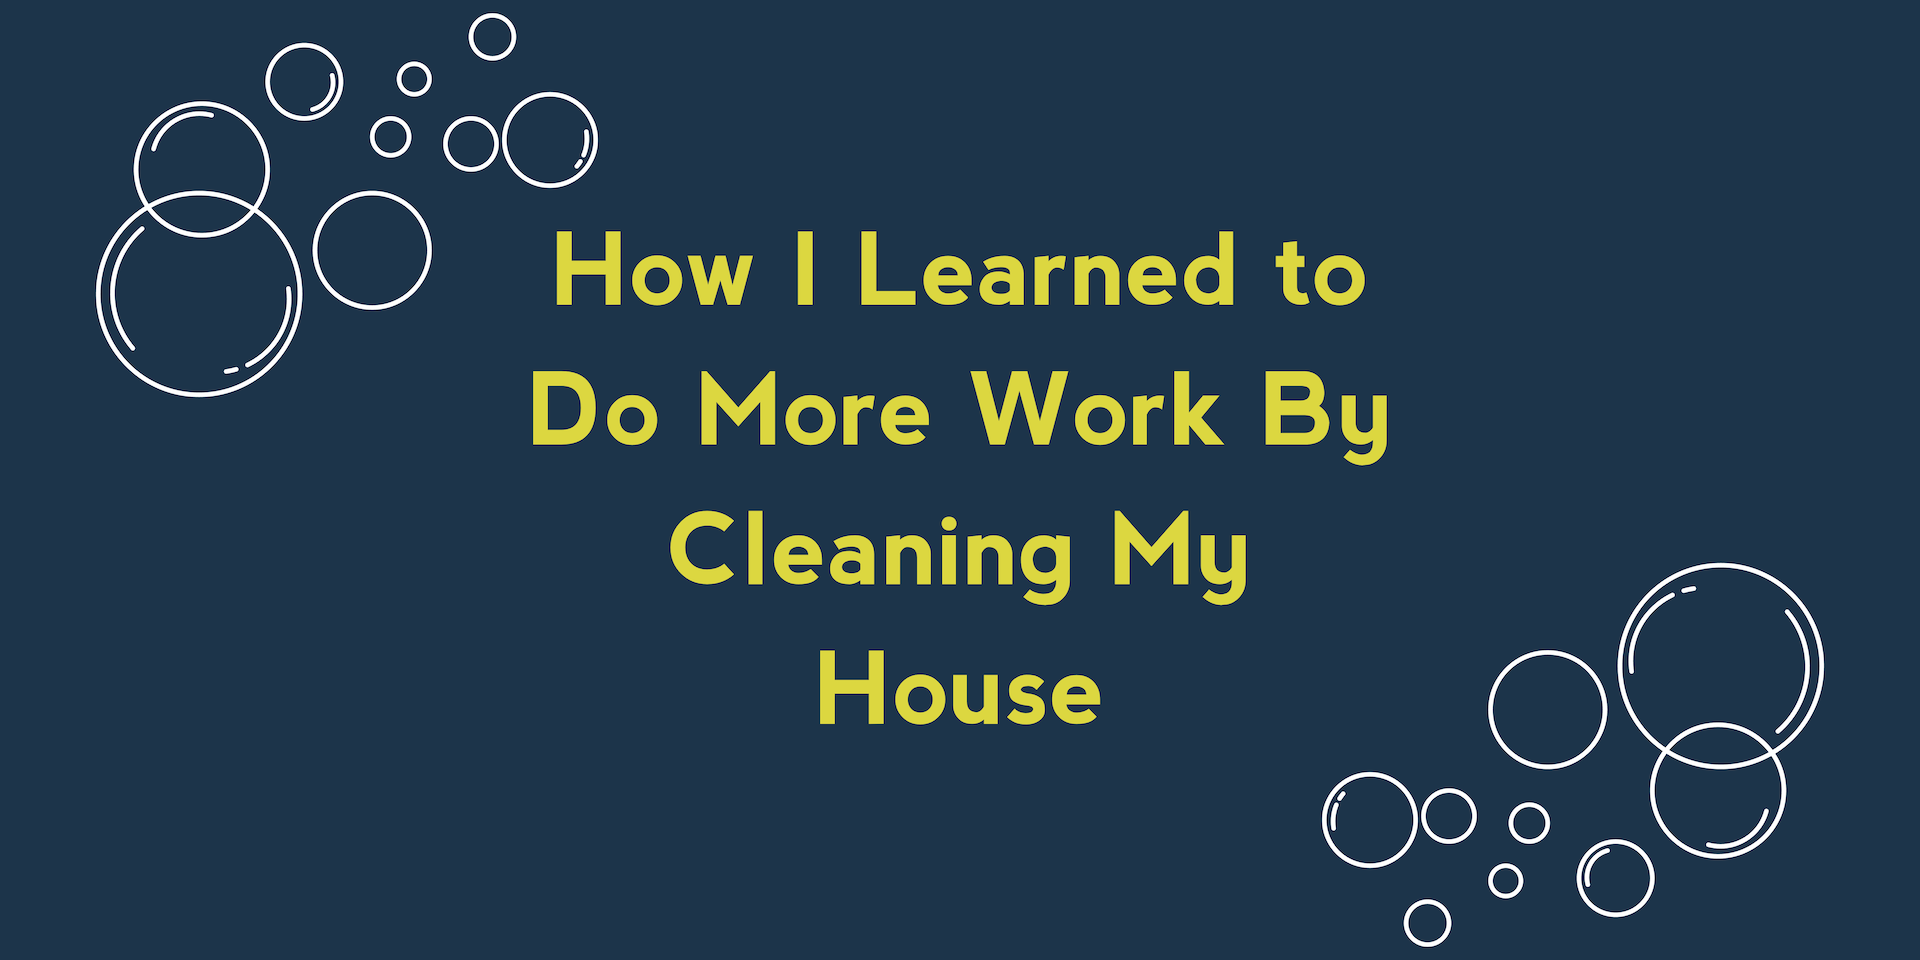 How I Learned to Do More Work By Cleaning My House